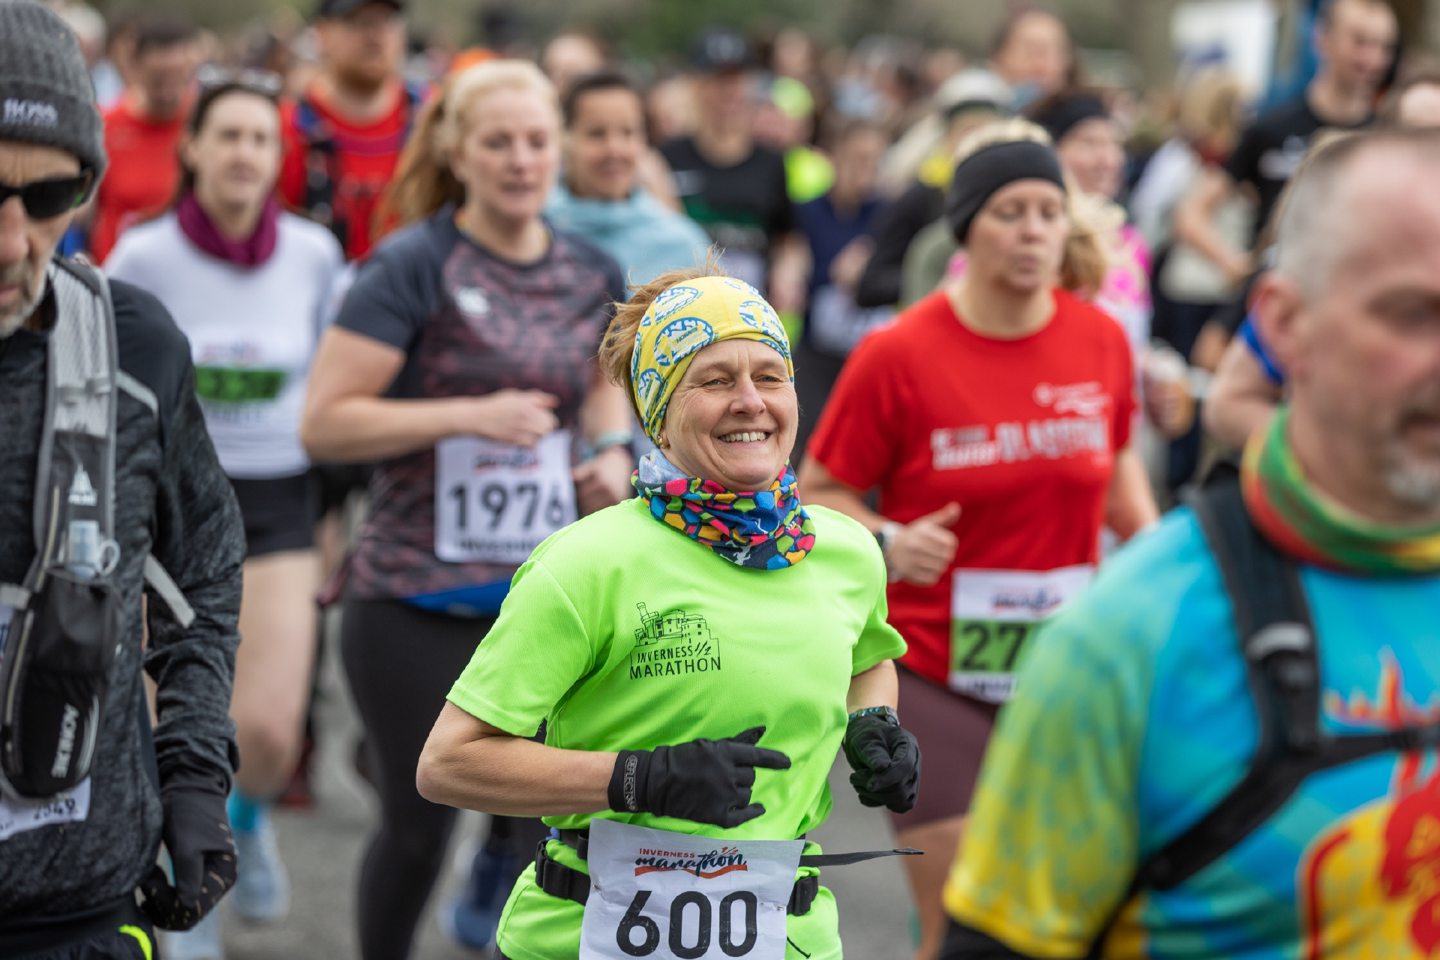 Record number of runners take part in 'extra special' Inverness Half